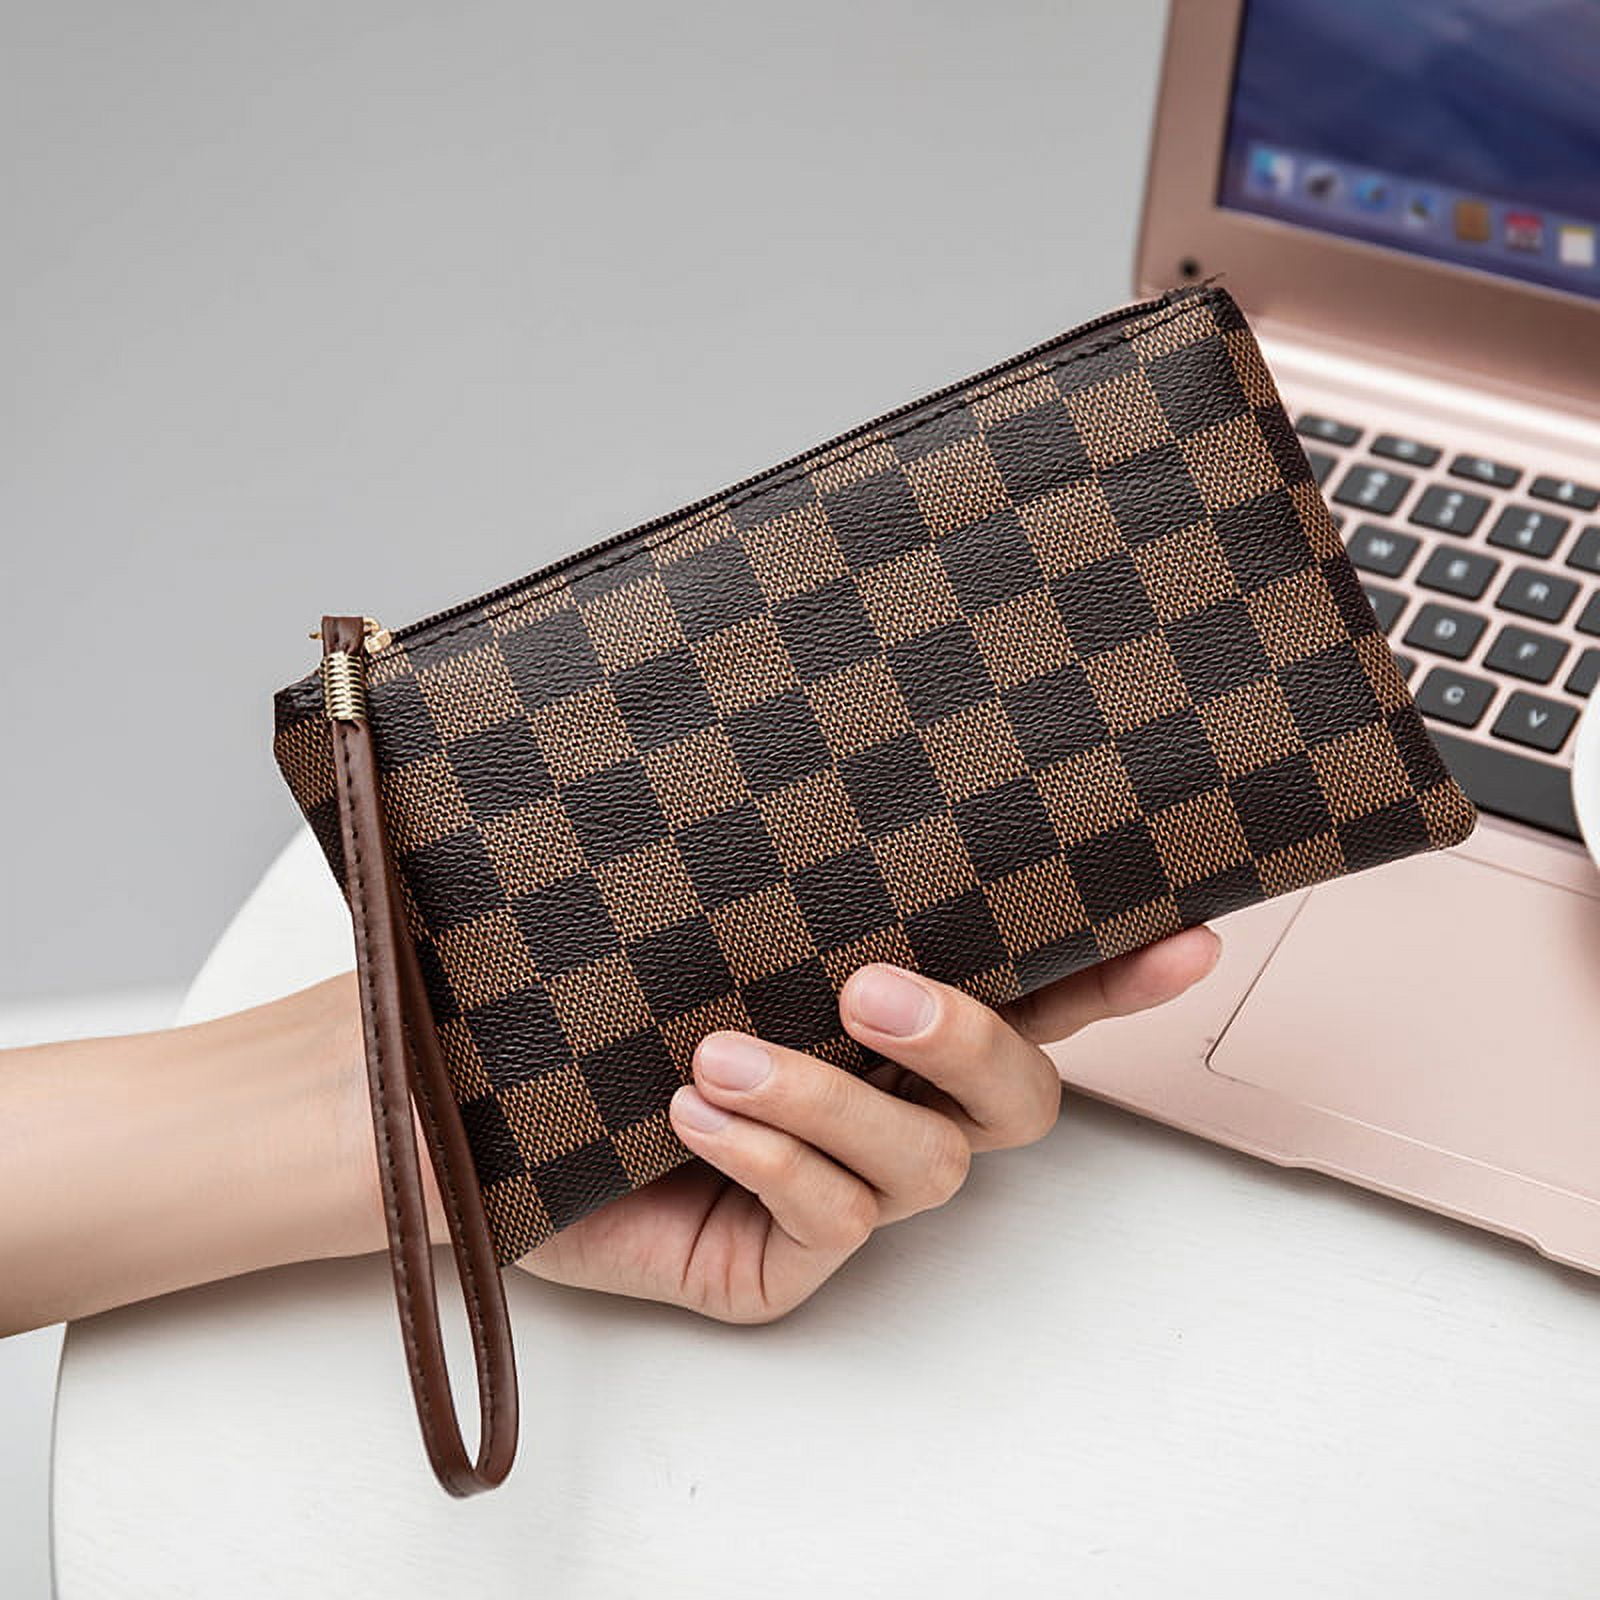 Aokur Checkered Travel Makeup Bag for Women Girls, Waterproof Brown  Cosmetic Pouch Case, Vagan Leather Toiletry Bag